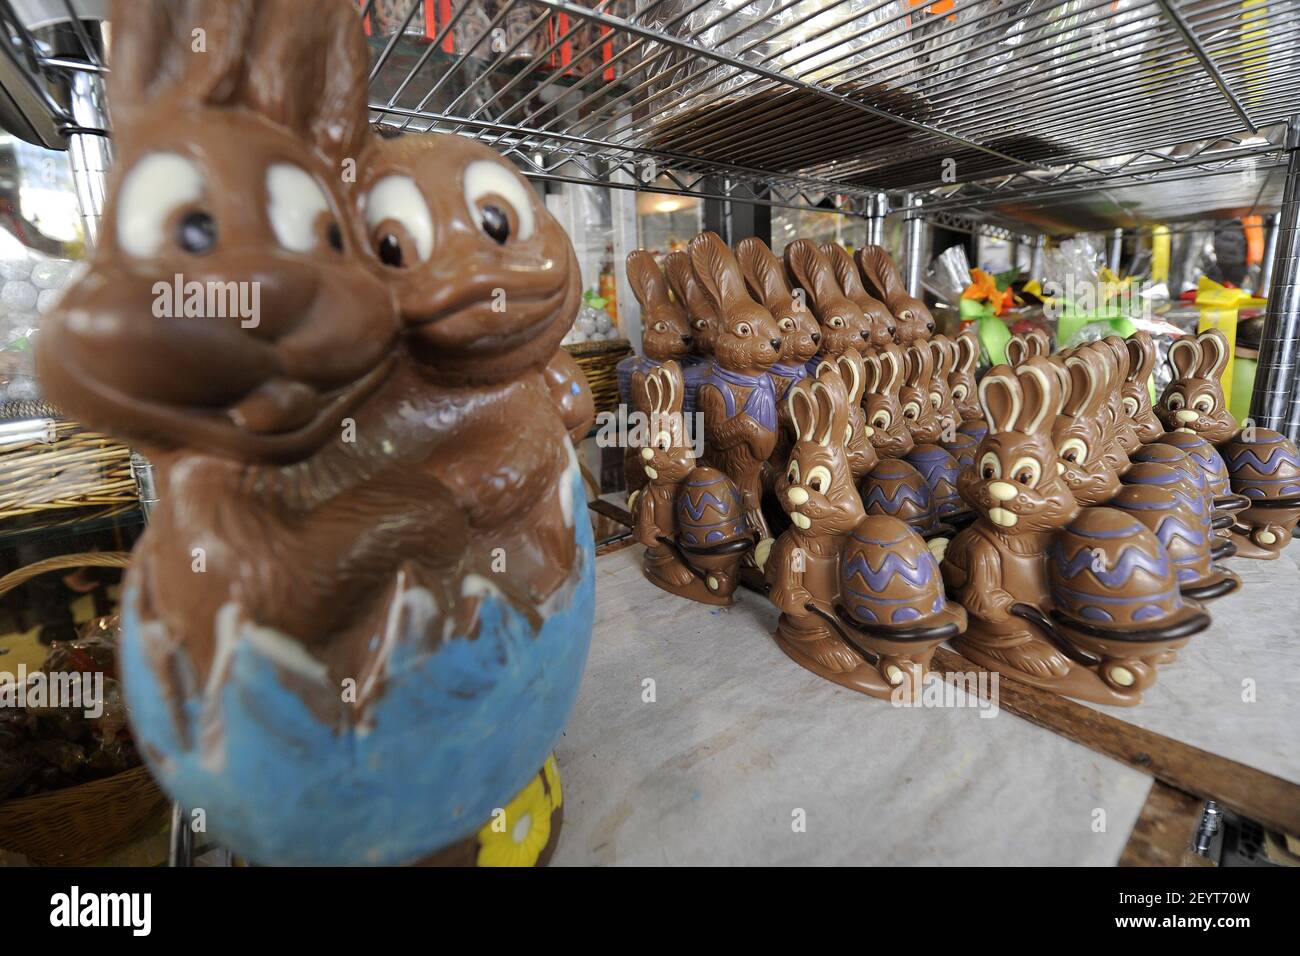 06 April 2012 - New York - Chocolate rabbits cool on shelves before being wrapped and put out on display at Jacques Torres Chocolates' Hudson Street retail store in anticipation of Easter Holiday weekend, April 6, 2012, New York, NY. Photo Credit: Anthony Behar/Sipa Press Stock Photo